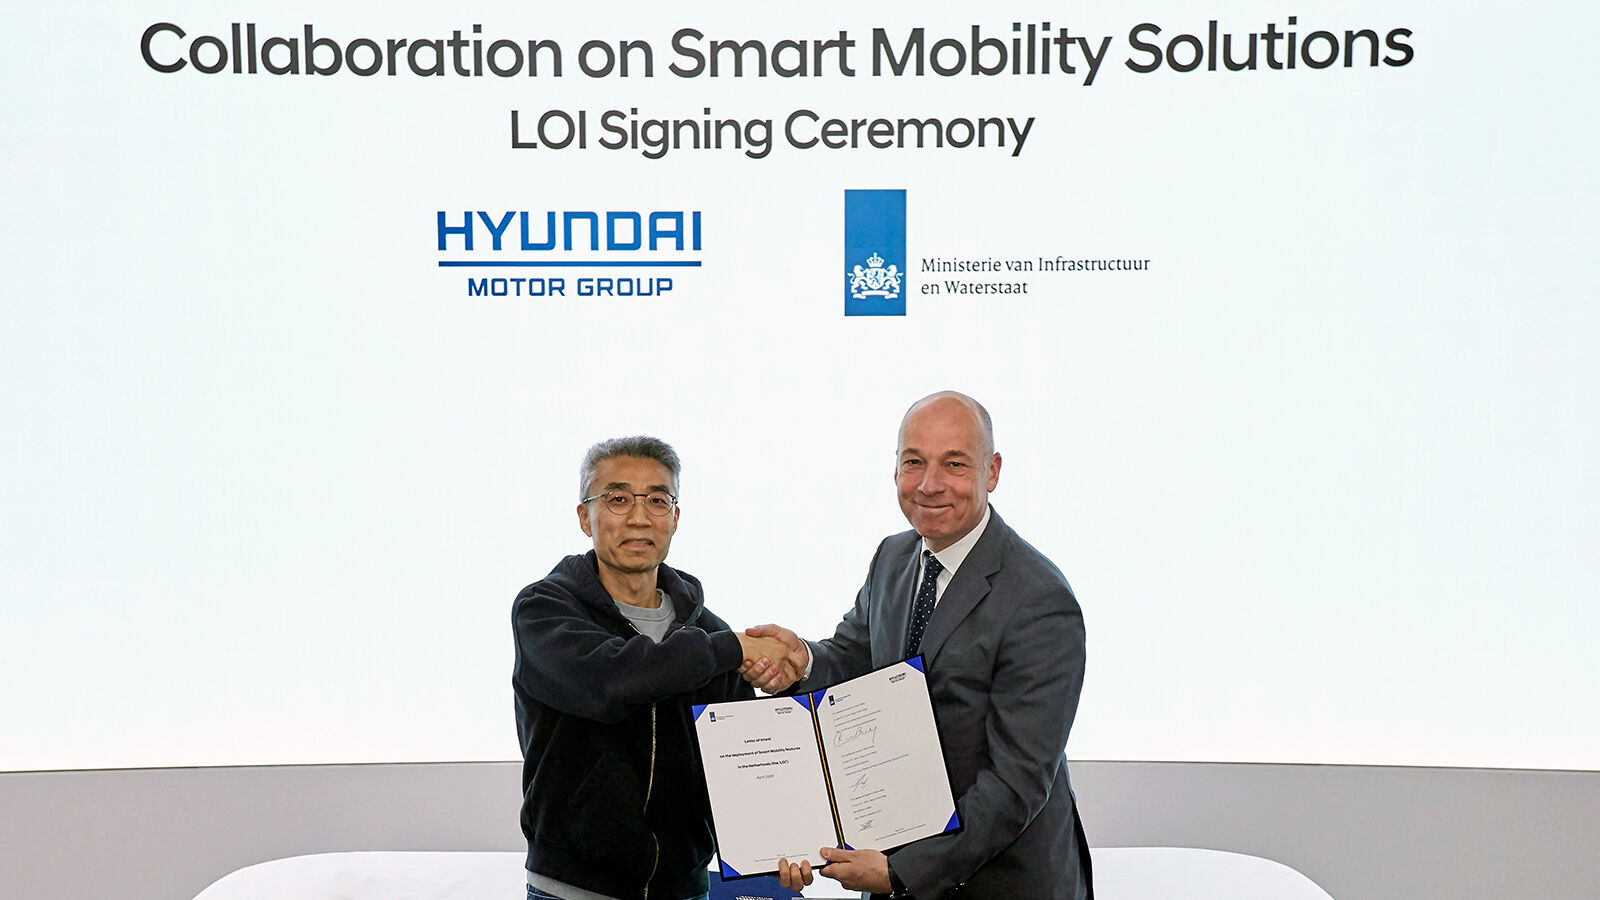 Chang Song, President and Head of Advanced Vehicle Platform Division and Kees Van der Burg, Vice Minister of Ministry of Infrastructure and Water Management of the Netherlands at the signing ceremony